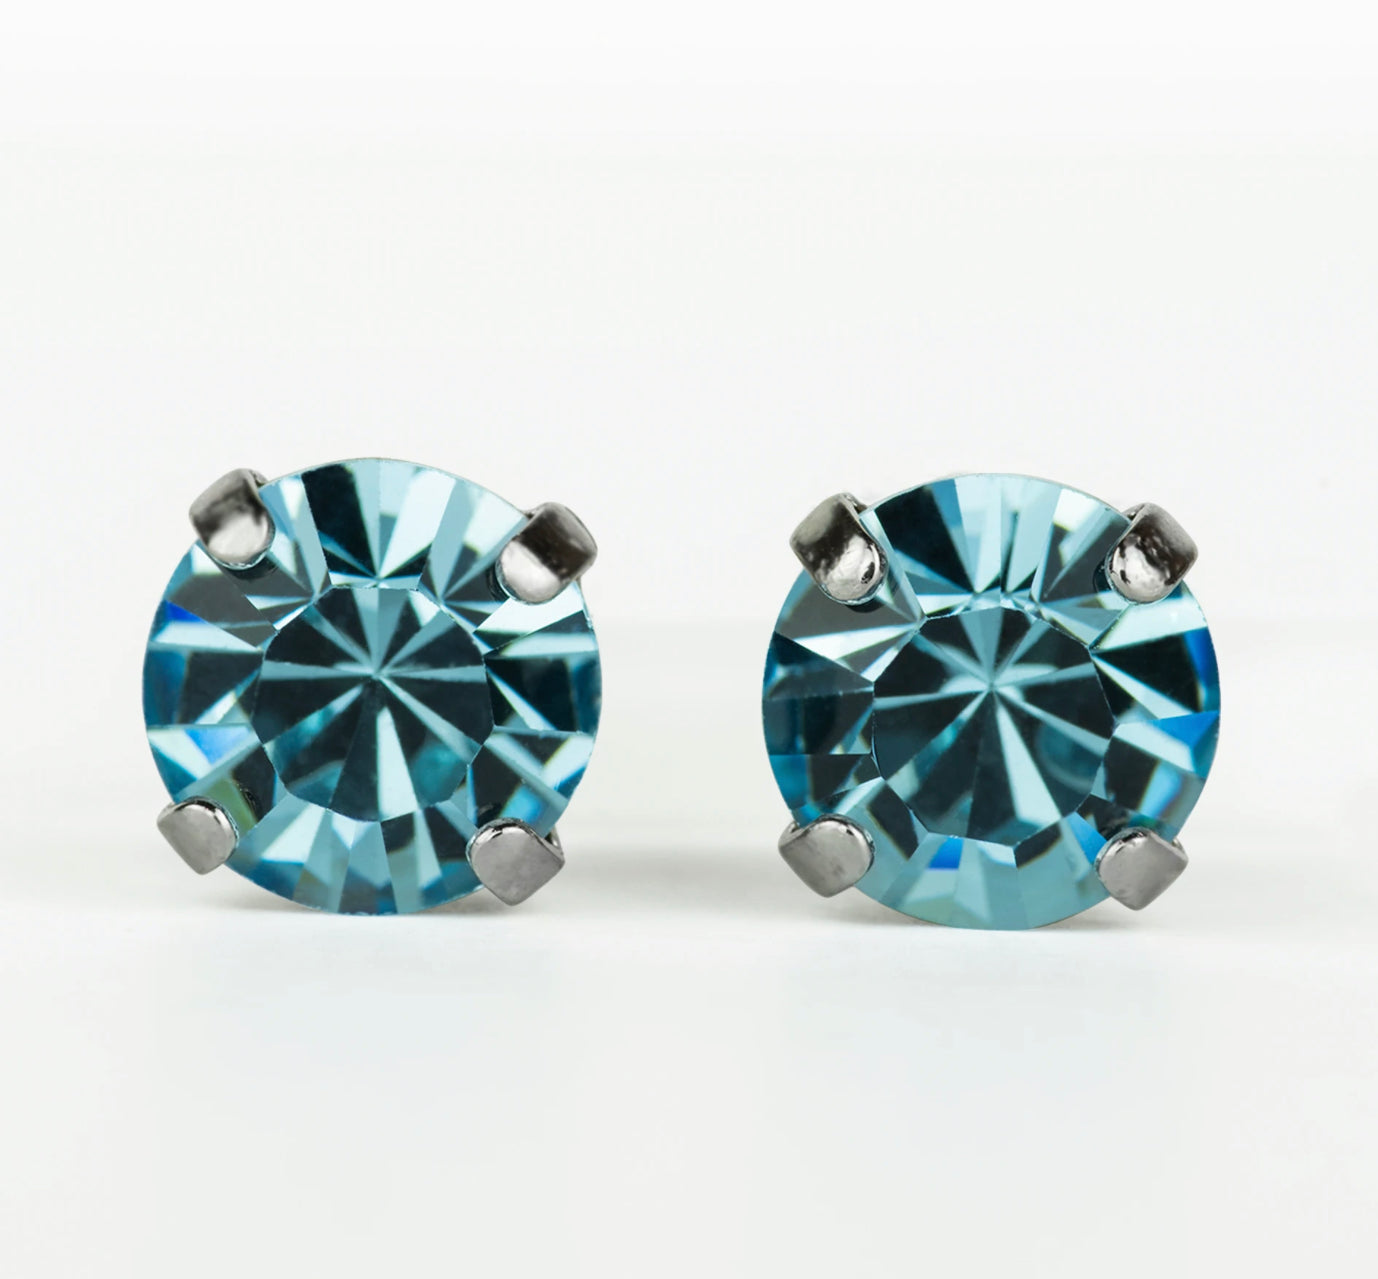 Mariana Antiqued Silver Plated Large Single Stone Post Earrings in "Aquamarine”